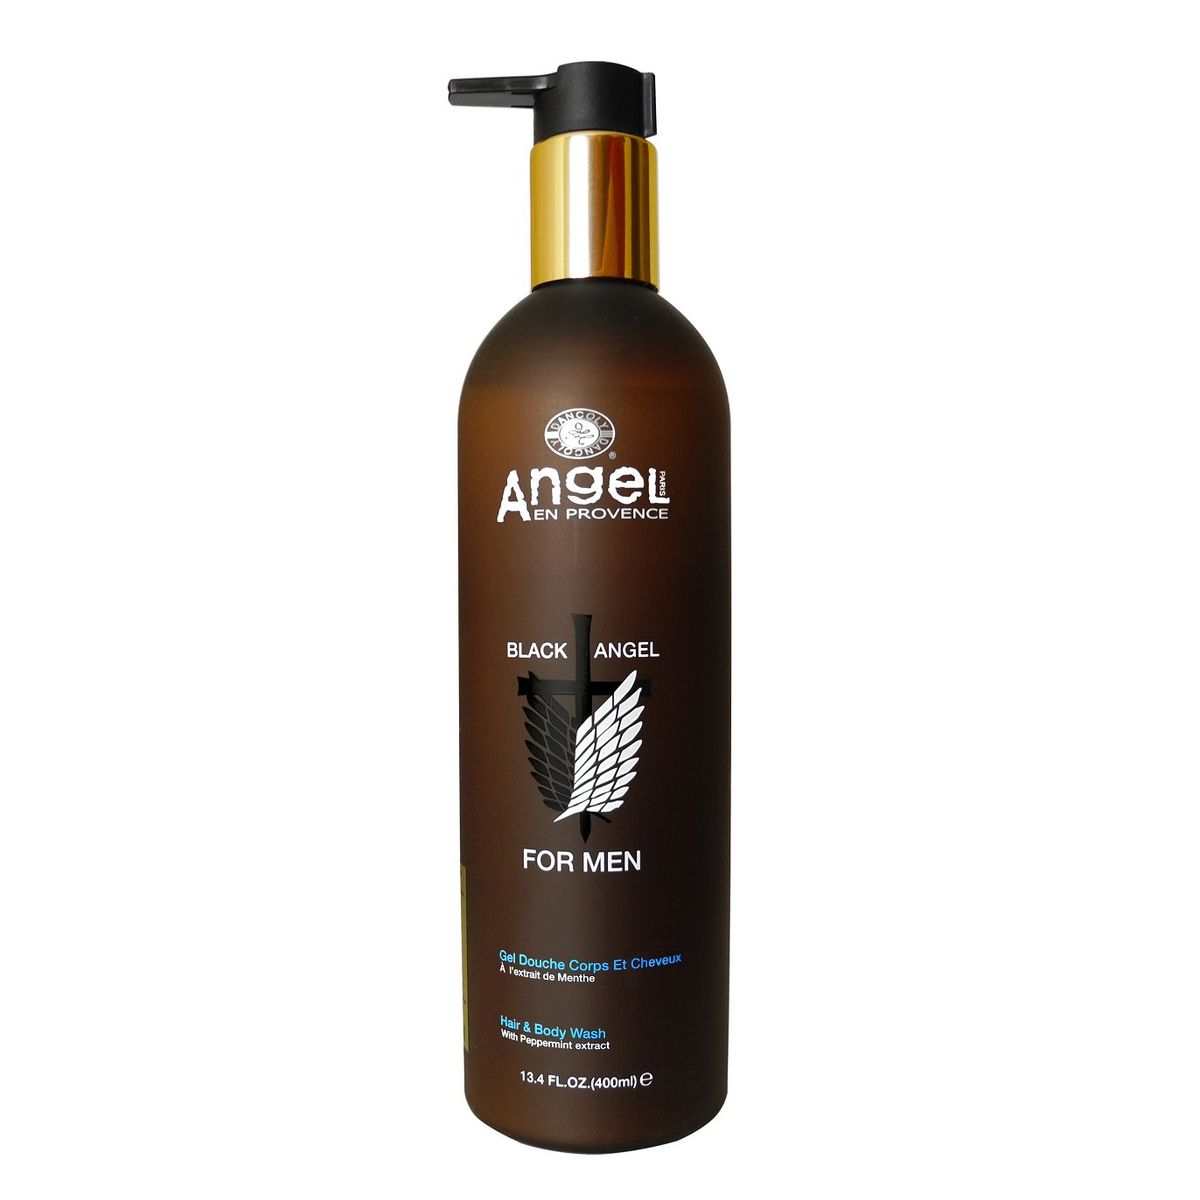 Black Angel for Men Hair and Body Wash 77105